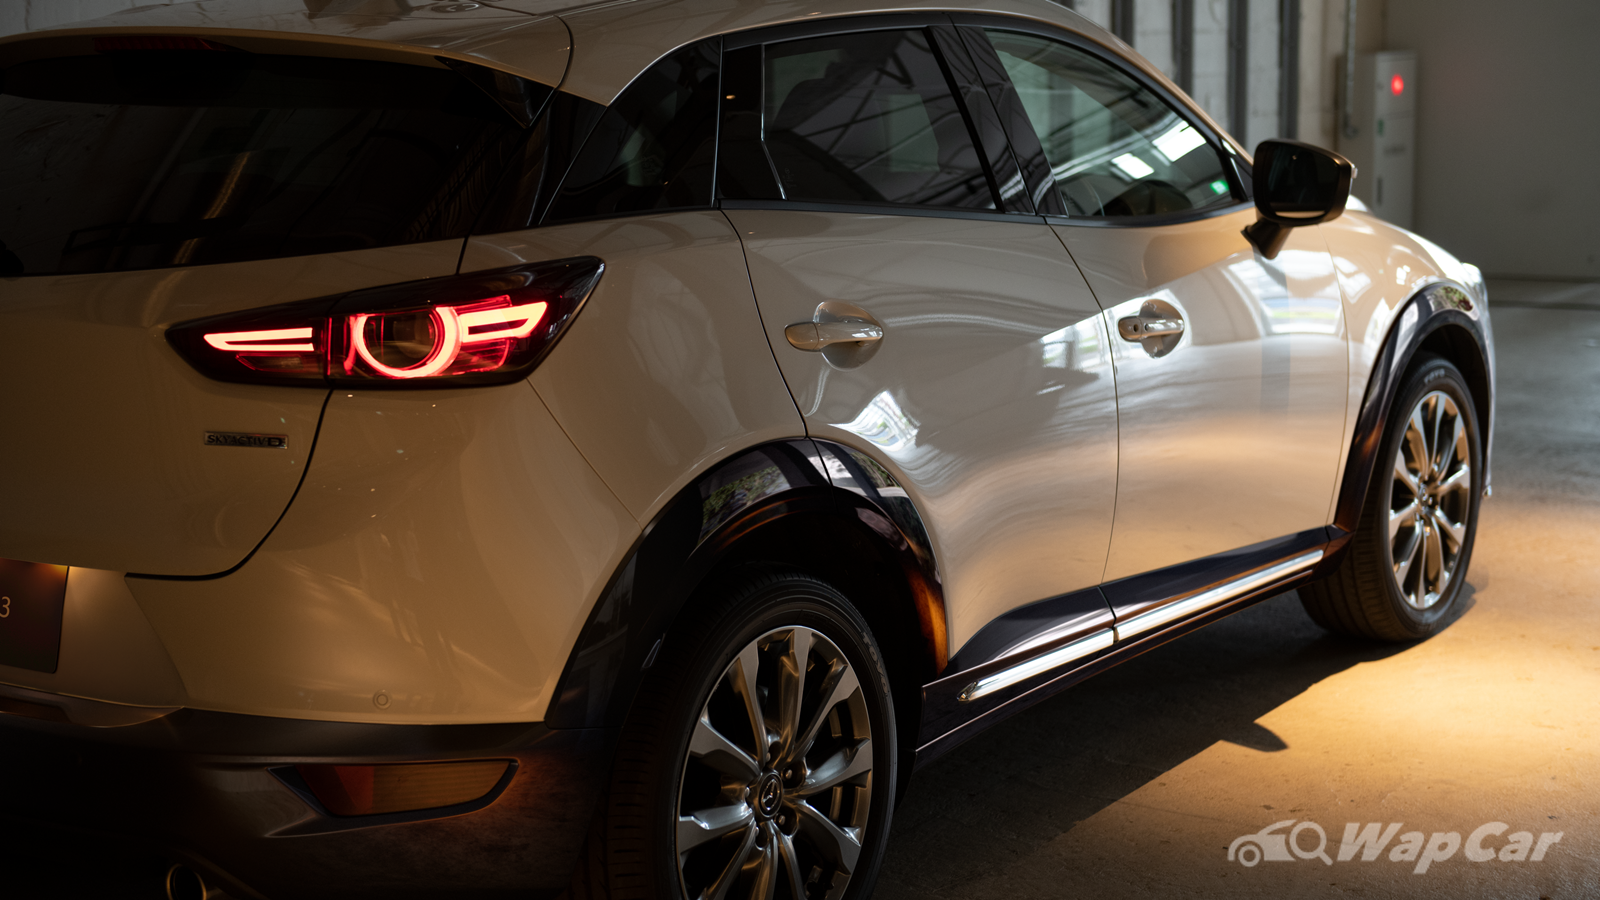 2022 Mazda CX-3 now in Malaysia – price up by RM 1k but adds 8-inch screen, wireless Apple CP, new colour